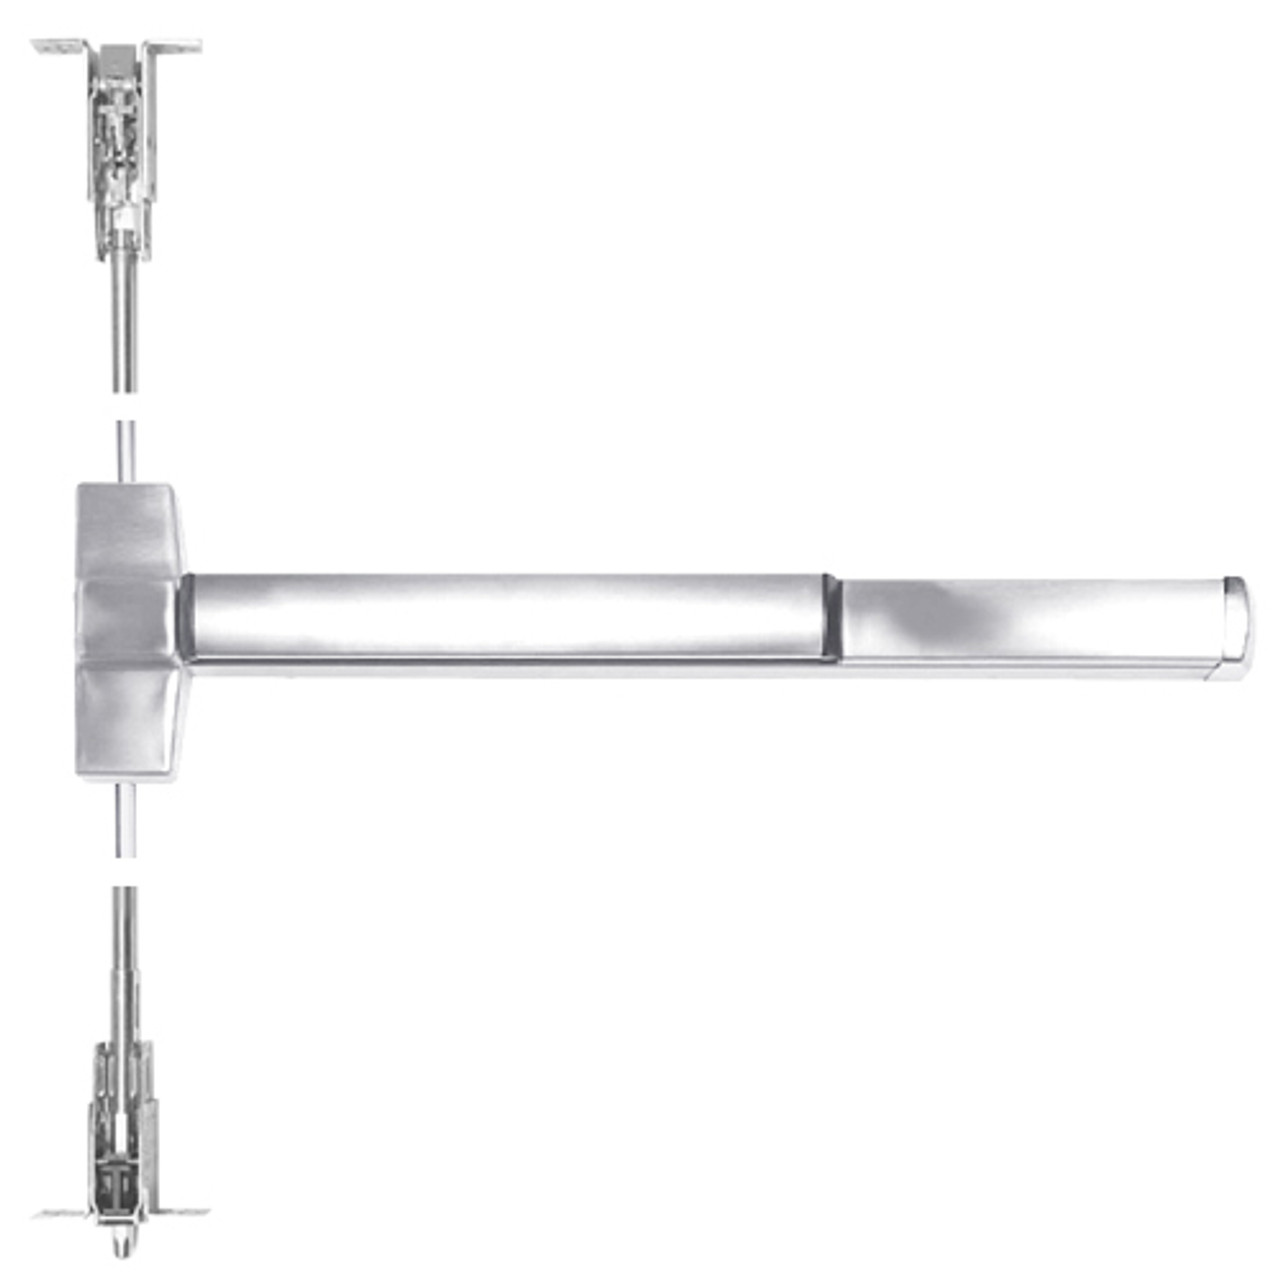 ED5800A-625 Corbin ED5800 Series Fire Rated Concealed Vertical Rod Device in Bright Chrome Finish